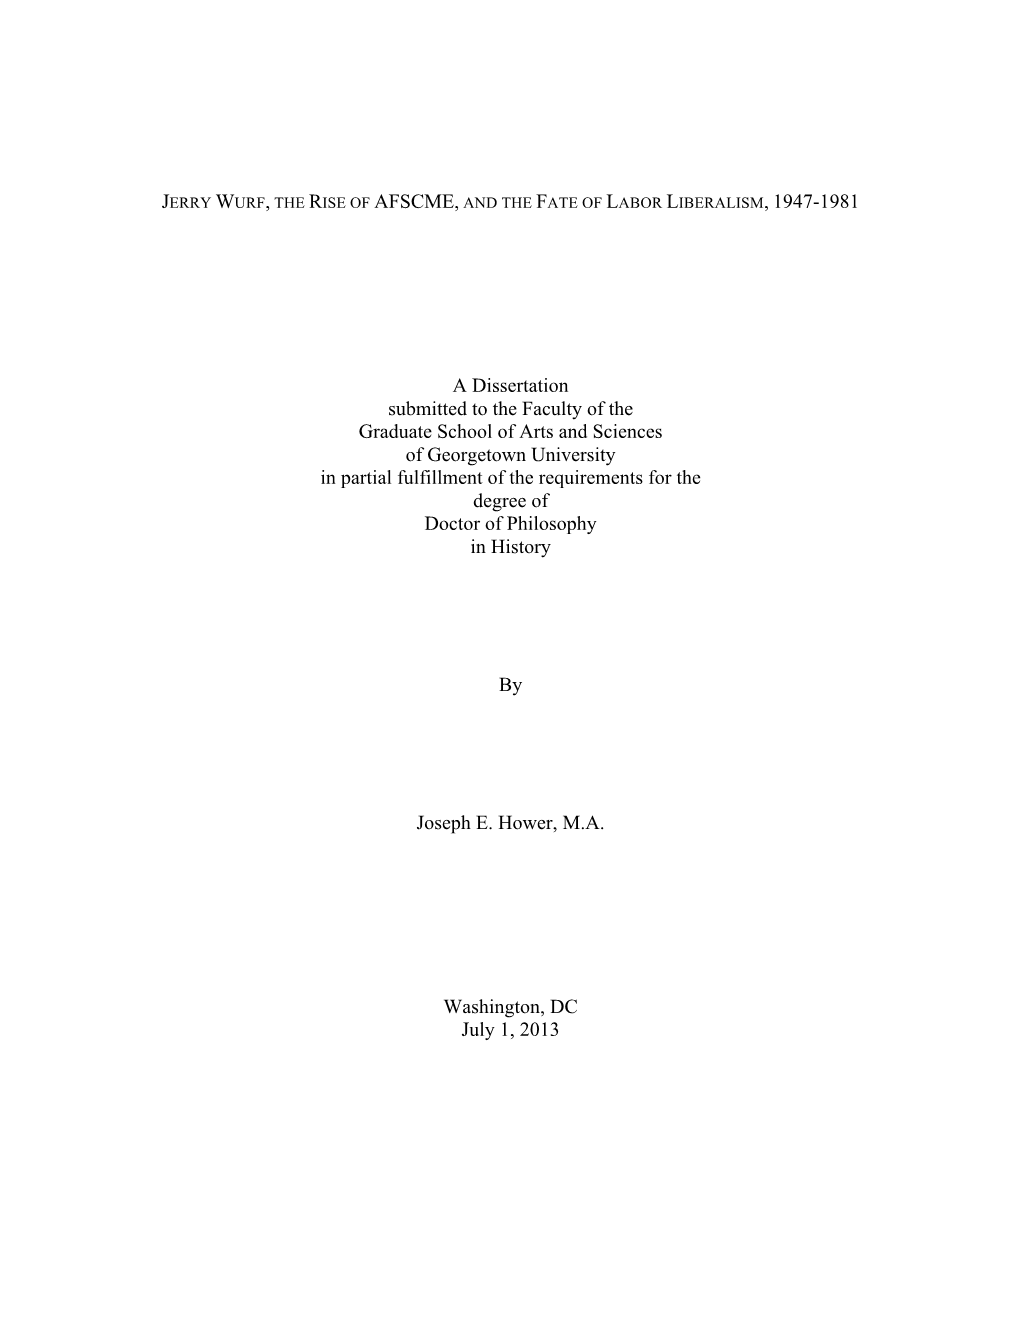 JERRY WURF, the RISE of AFSCME, and the FATE of LABOR LIBERALISM, 1947-1981 a Dissertation Submitted to the Faculty of the Gradu